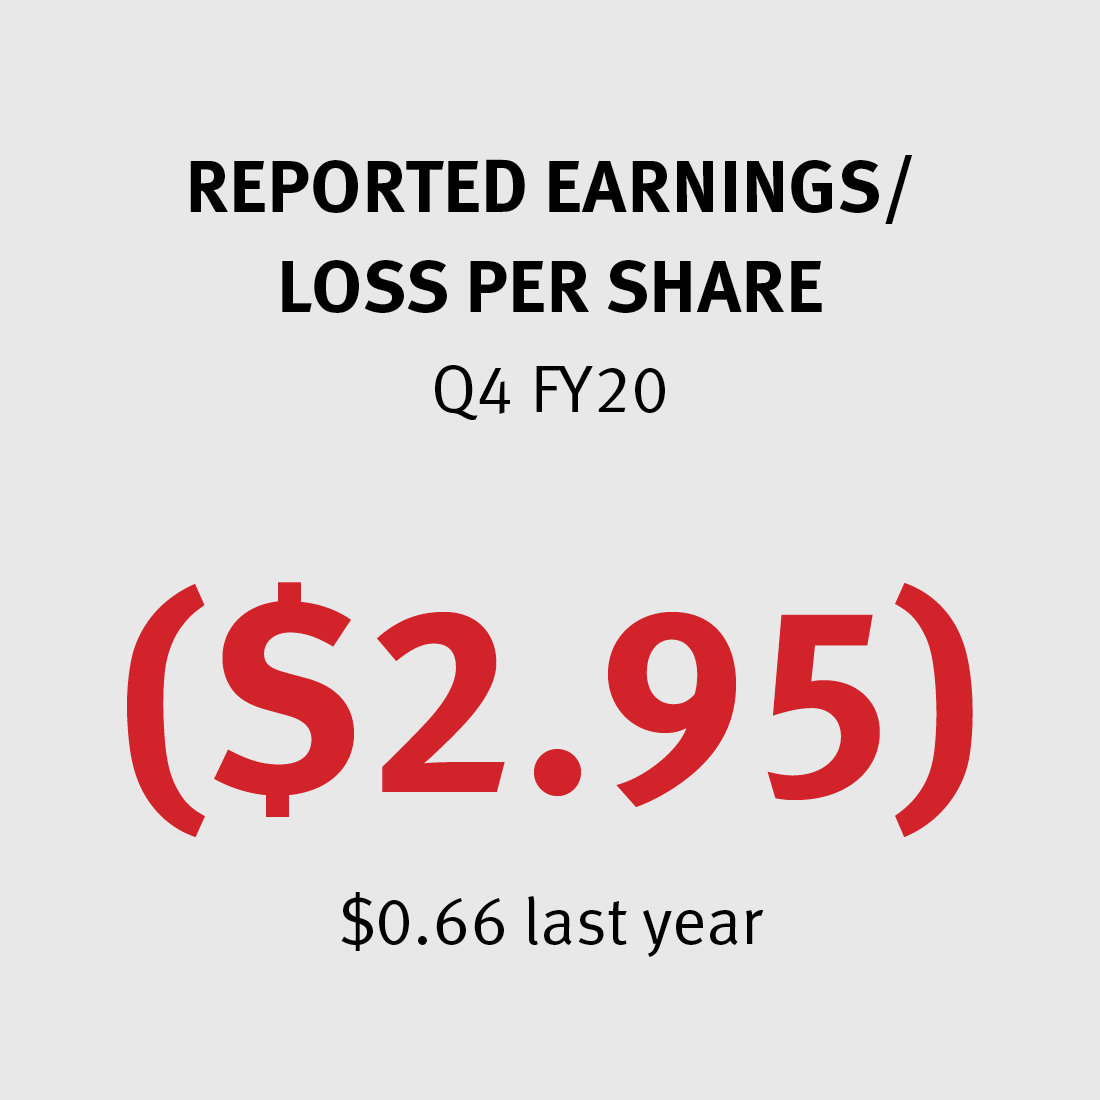 Reported Earnings per Share -$2.95 ($0.66 last year)